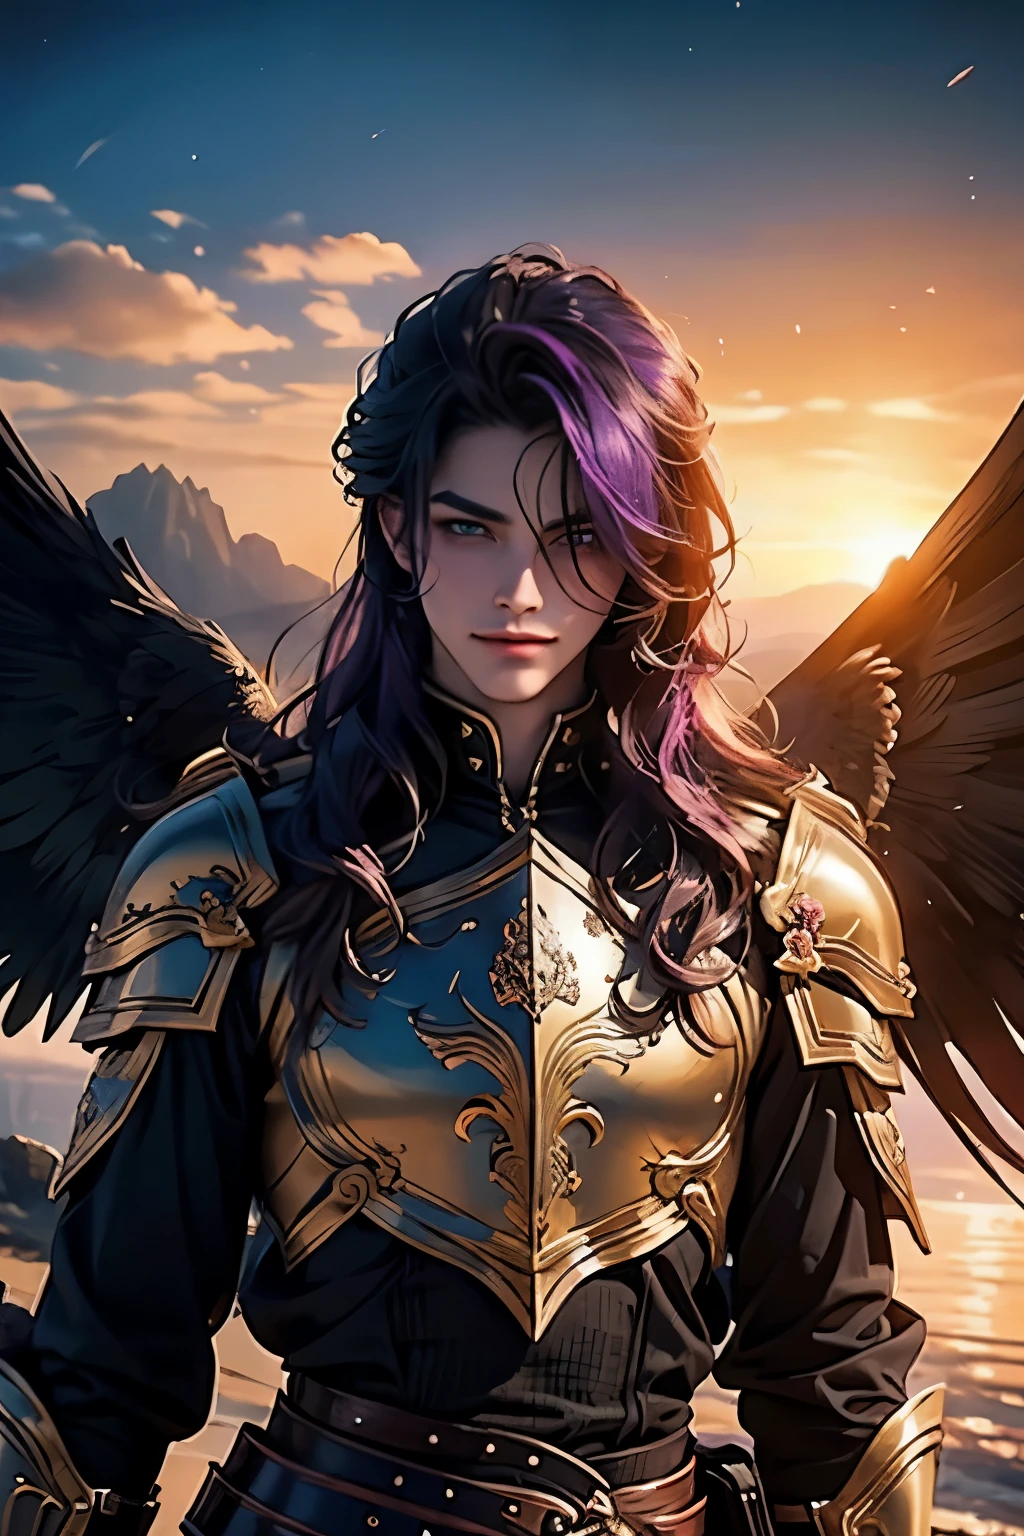 ((Best quality)), ((masterpiece)), 8k (detailed), ((perfect face)), ((halfbody)) perfect proporcions, he is a beautiful angel, he is 18 years old, he has violet hair, he has beautiful eyes, he has long hair, he dresses in armor, fantasy clothes, he has white angel wings, he smiles, there is a heaven sunset rose behind him, ((perfect face)) halfbody